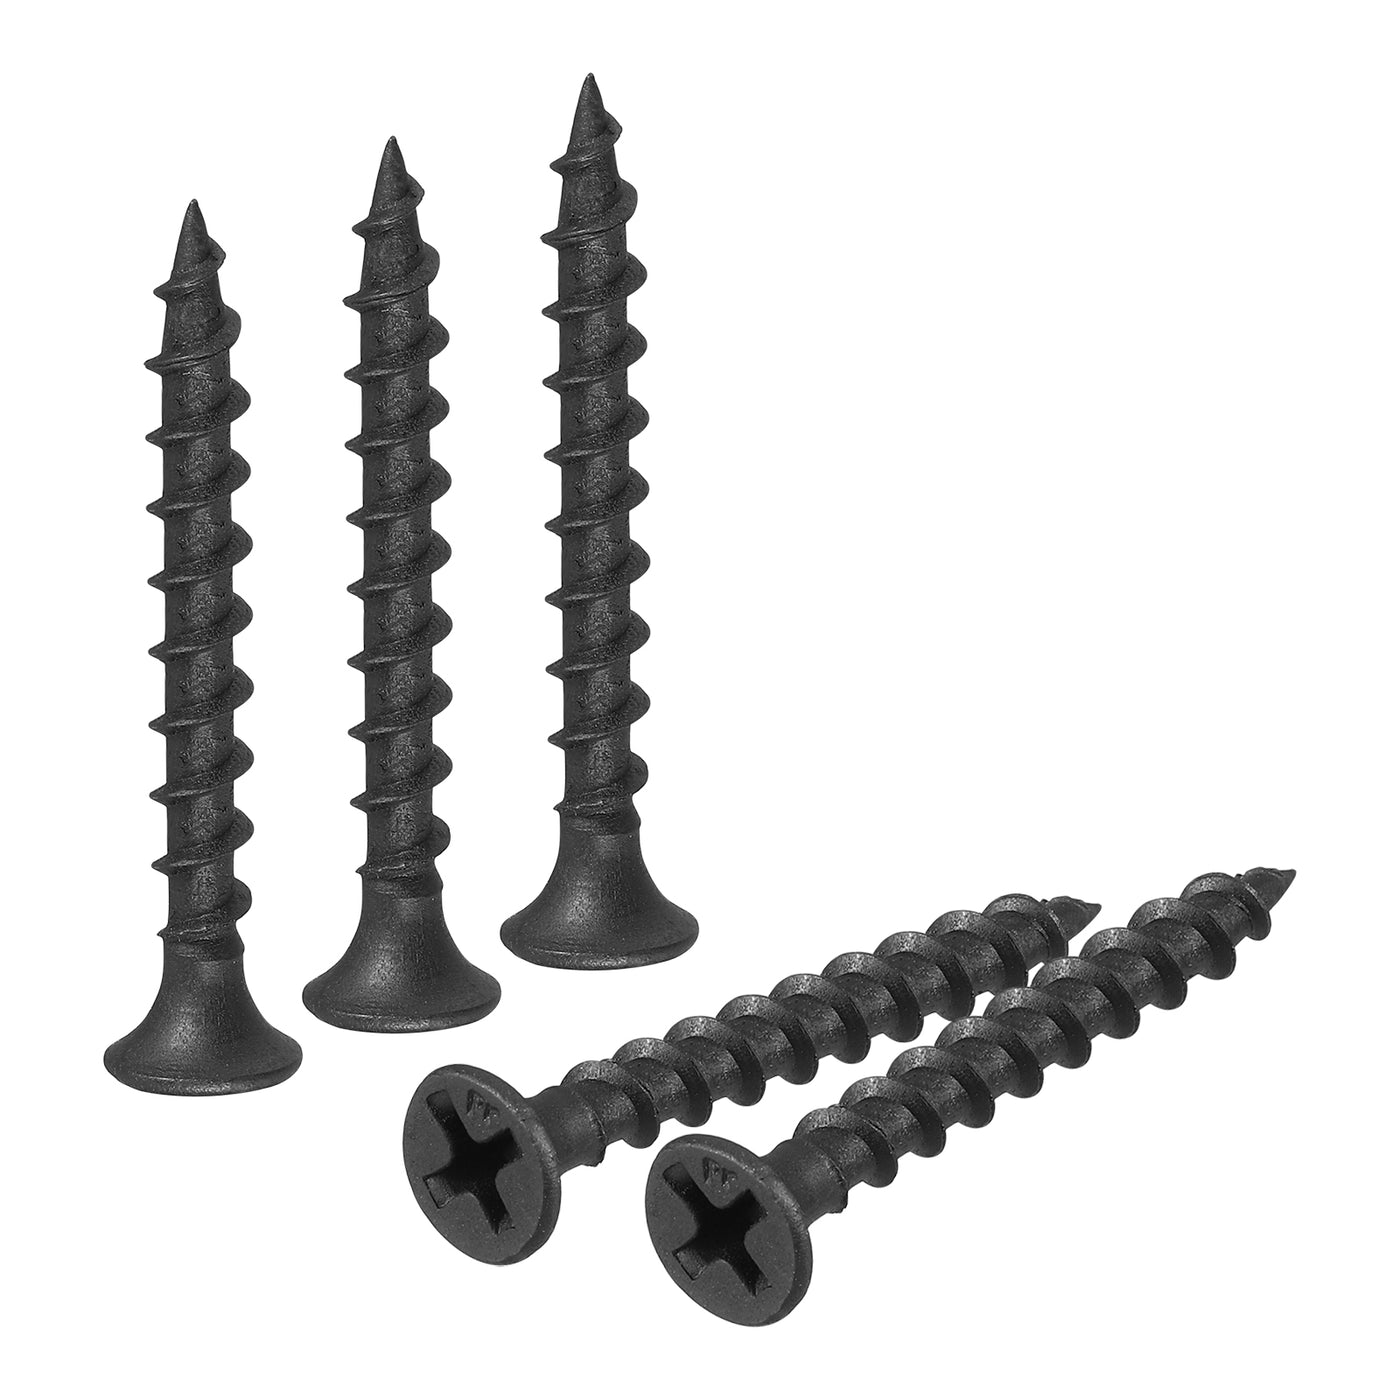 uxcell Uxcell M3.8x35mm 100pcs Phillips Drive Wood Screws, Carbon Steel Self Tapping Screws